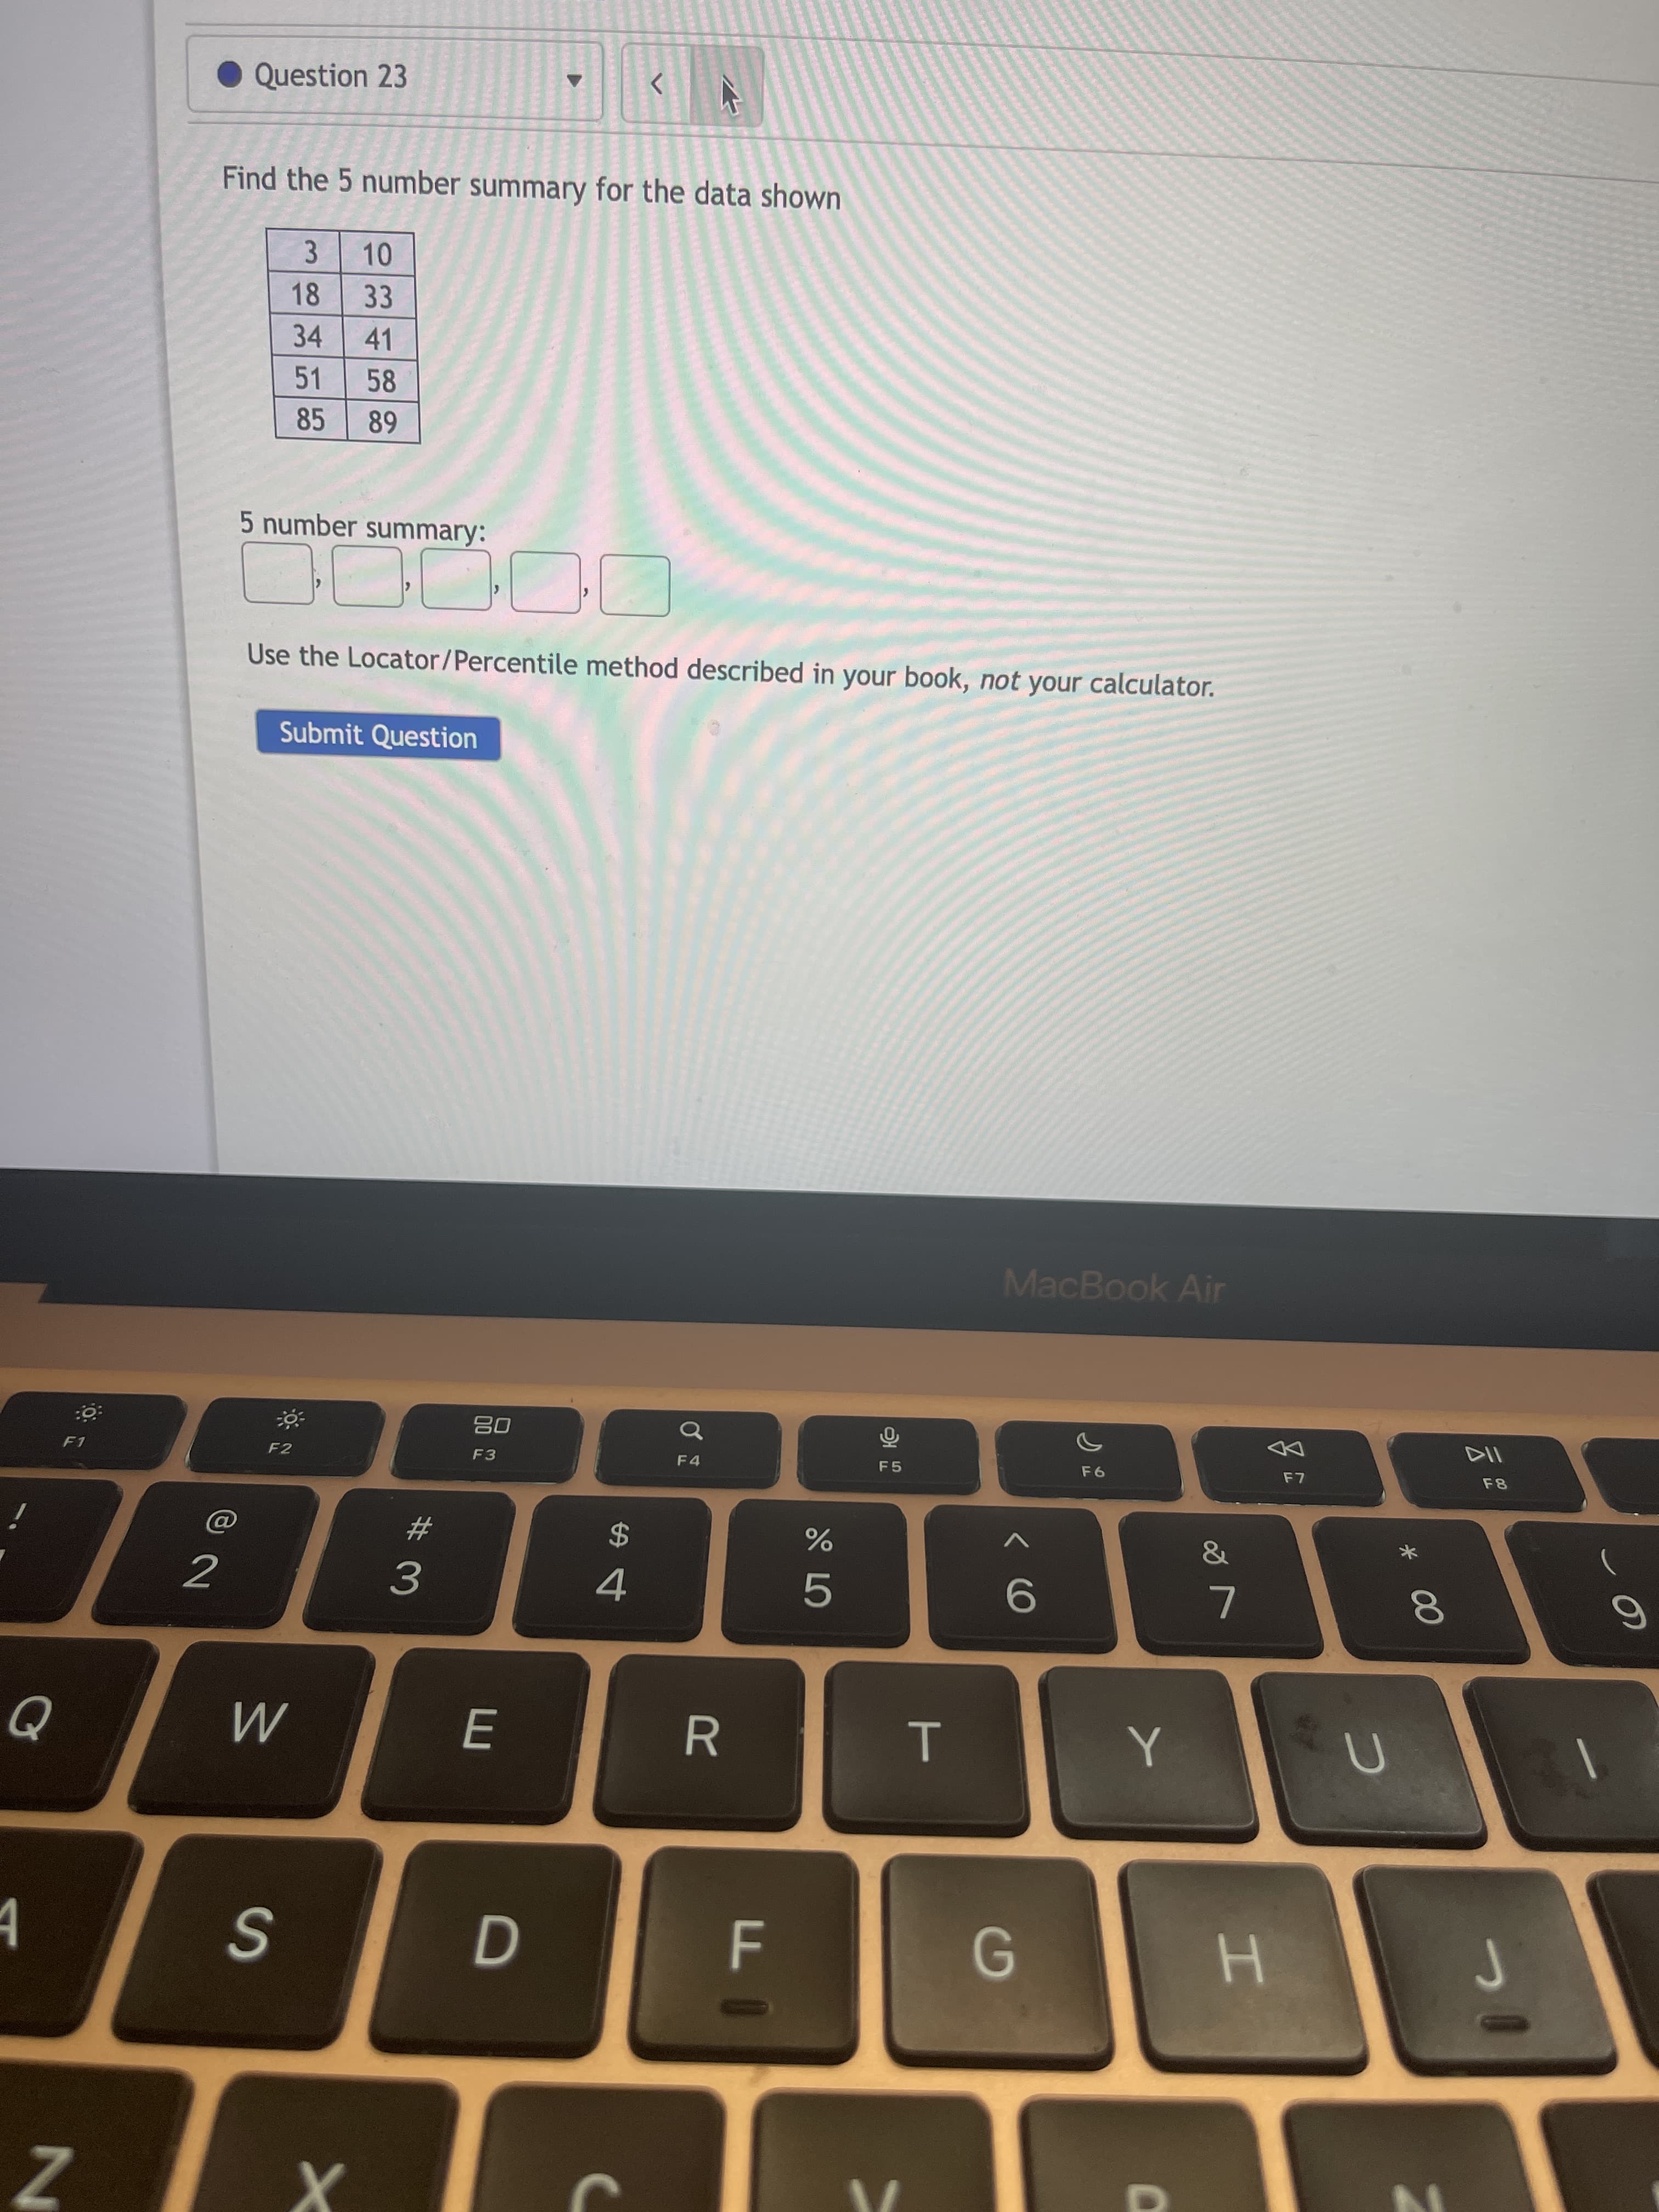 * 00
T
R
%24
E
• Question 23
Find the 5 number summary for the data shown
10
3.
18
33
34
41
51
58
85
68
5 number summary:
Use the Locator/Percentile method described in your book, not your calculator.
Submit Question
MacBook Air
08
F3
F8
F1
F2
F4
F5
%23
)
2
4
3.
M
F
G
H
